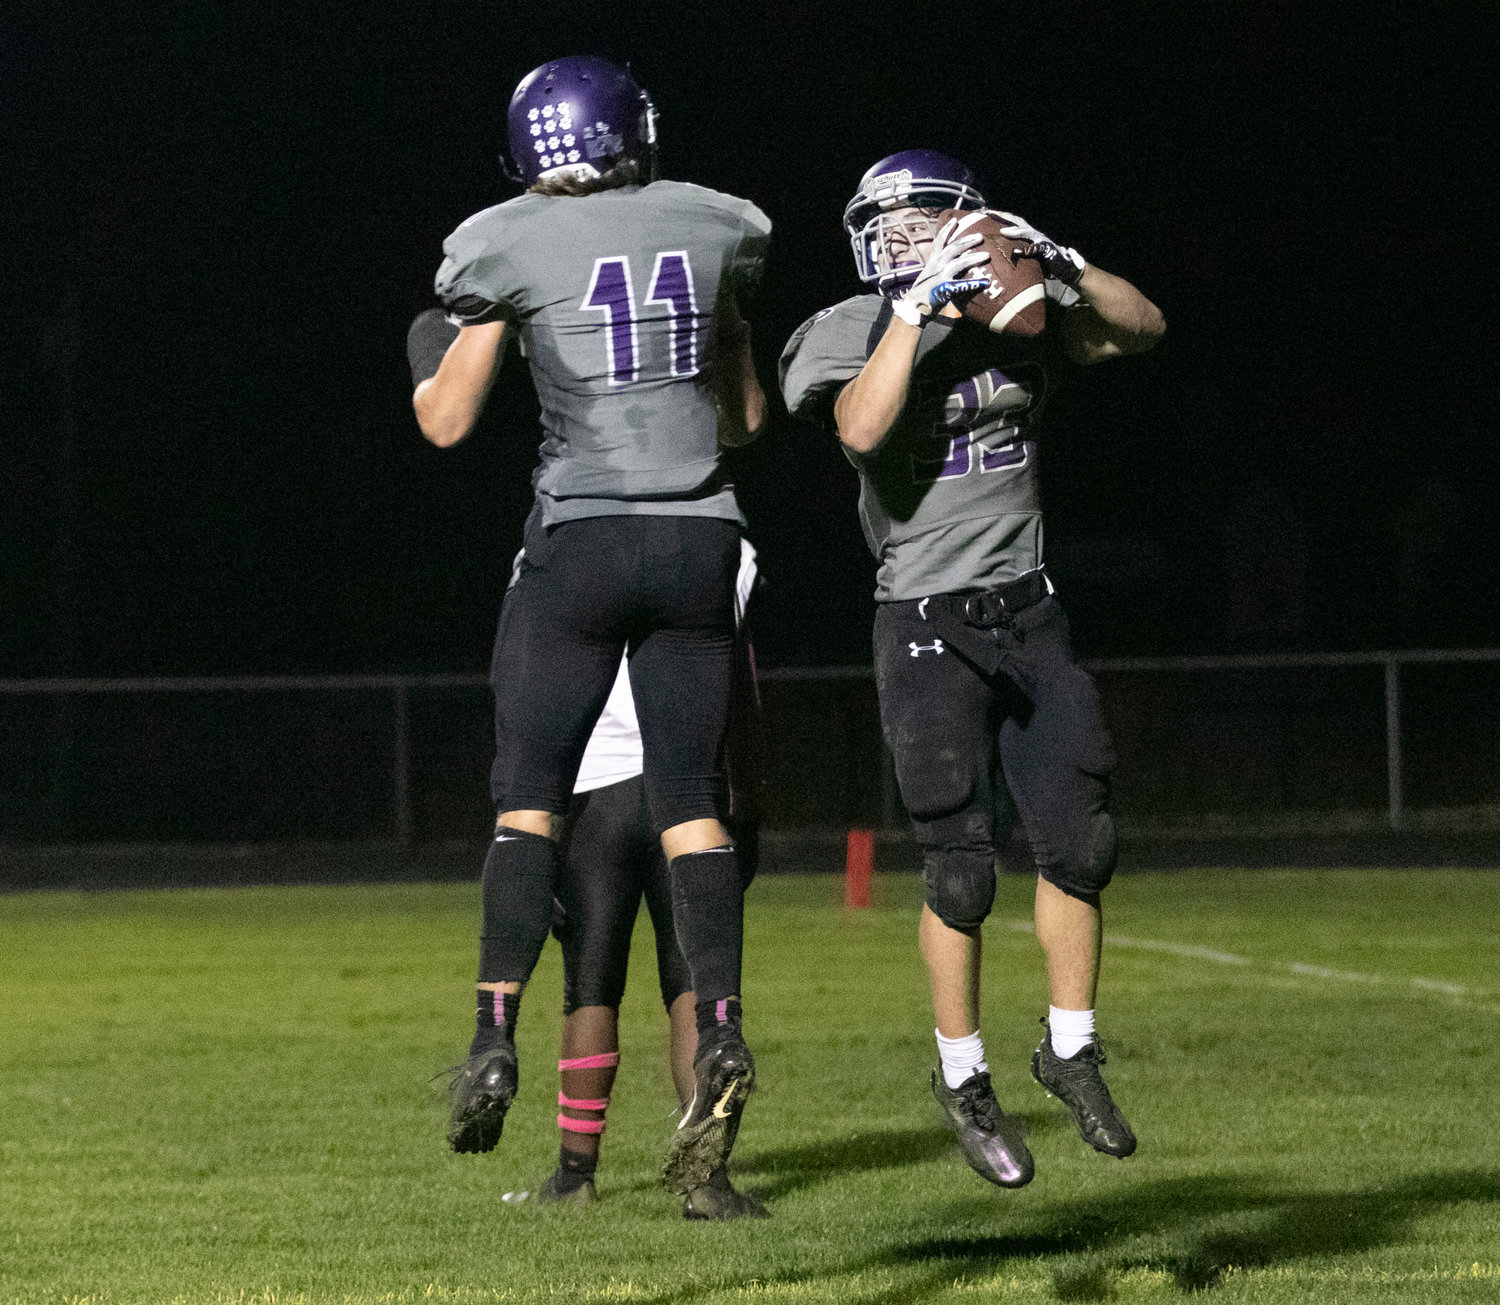 Bruce McGuire (left) celebrates with Brock Pacheco after he scored the Huskies first touchdown in the first quarter.